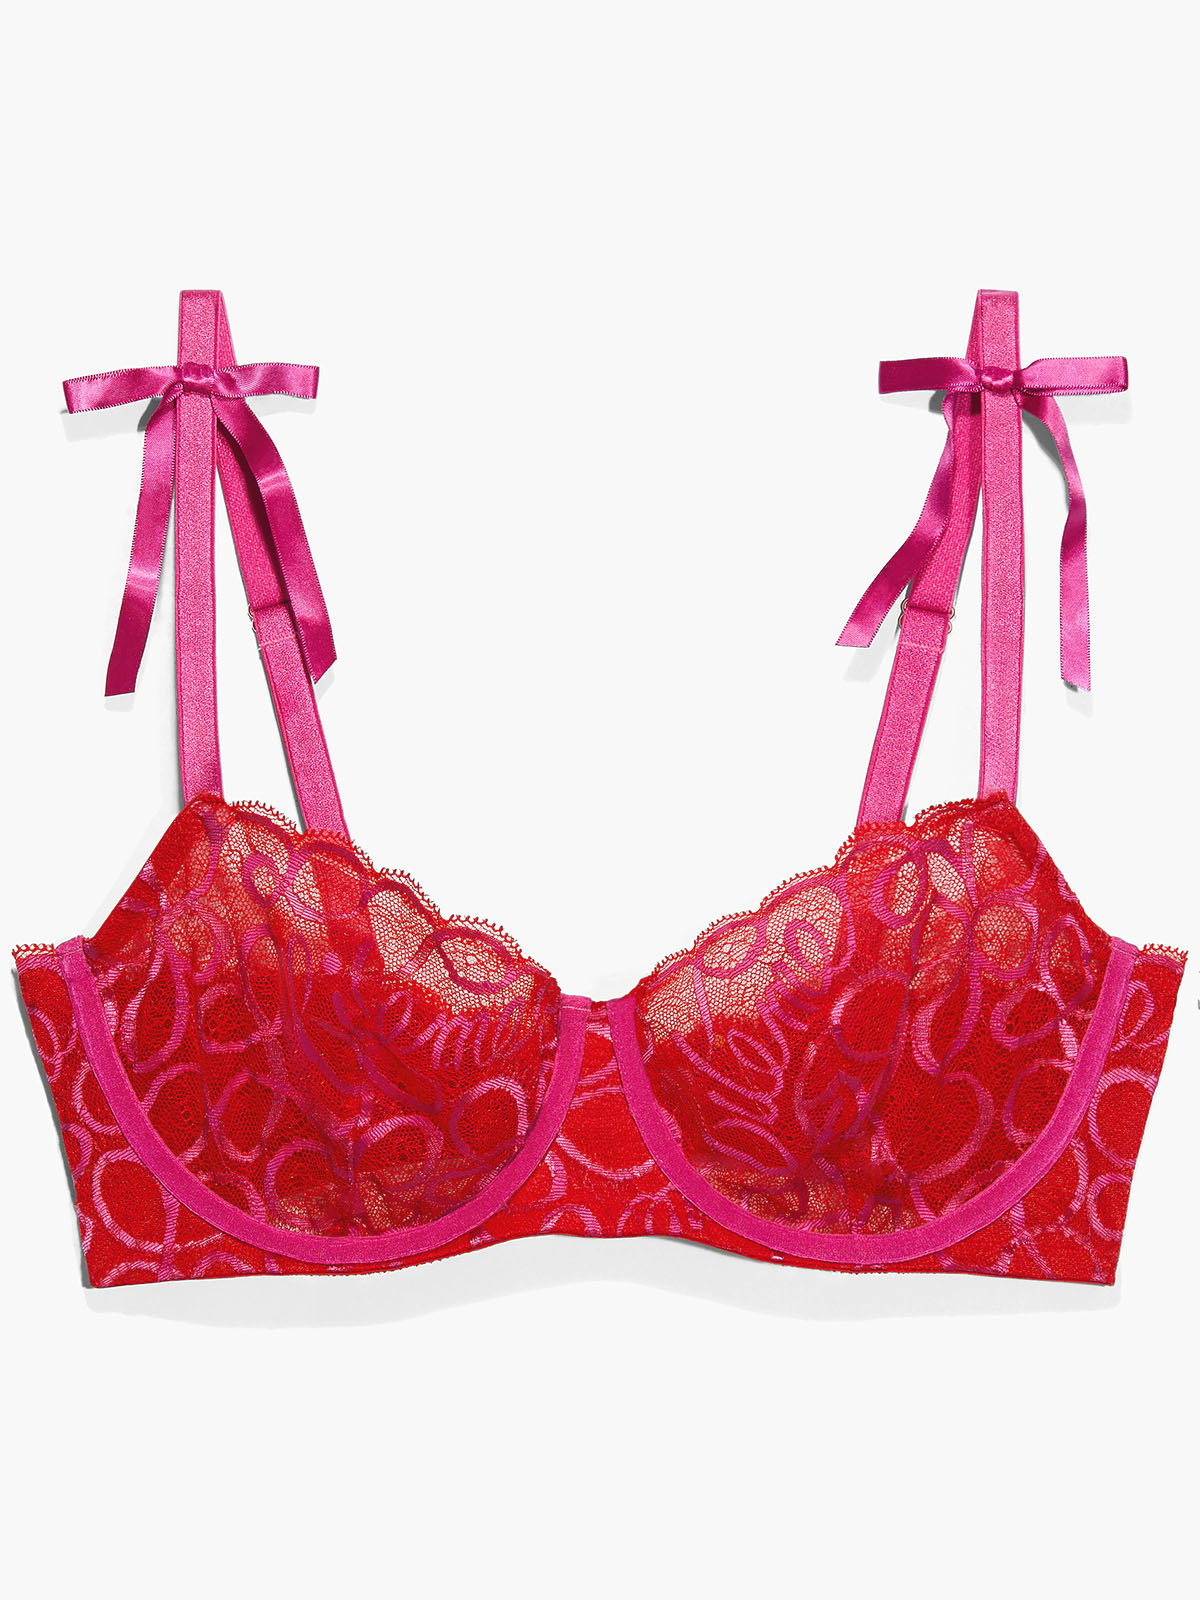 Ribbon Writing Unlined Lace Balconette Bra in Pink & Red | SAVAGE X FENTY